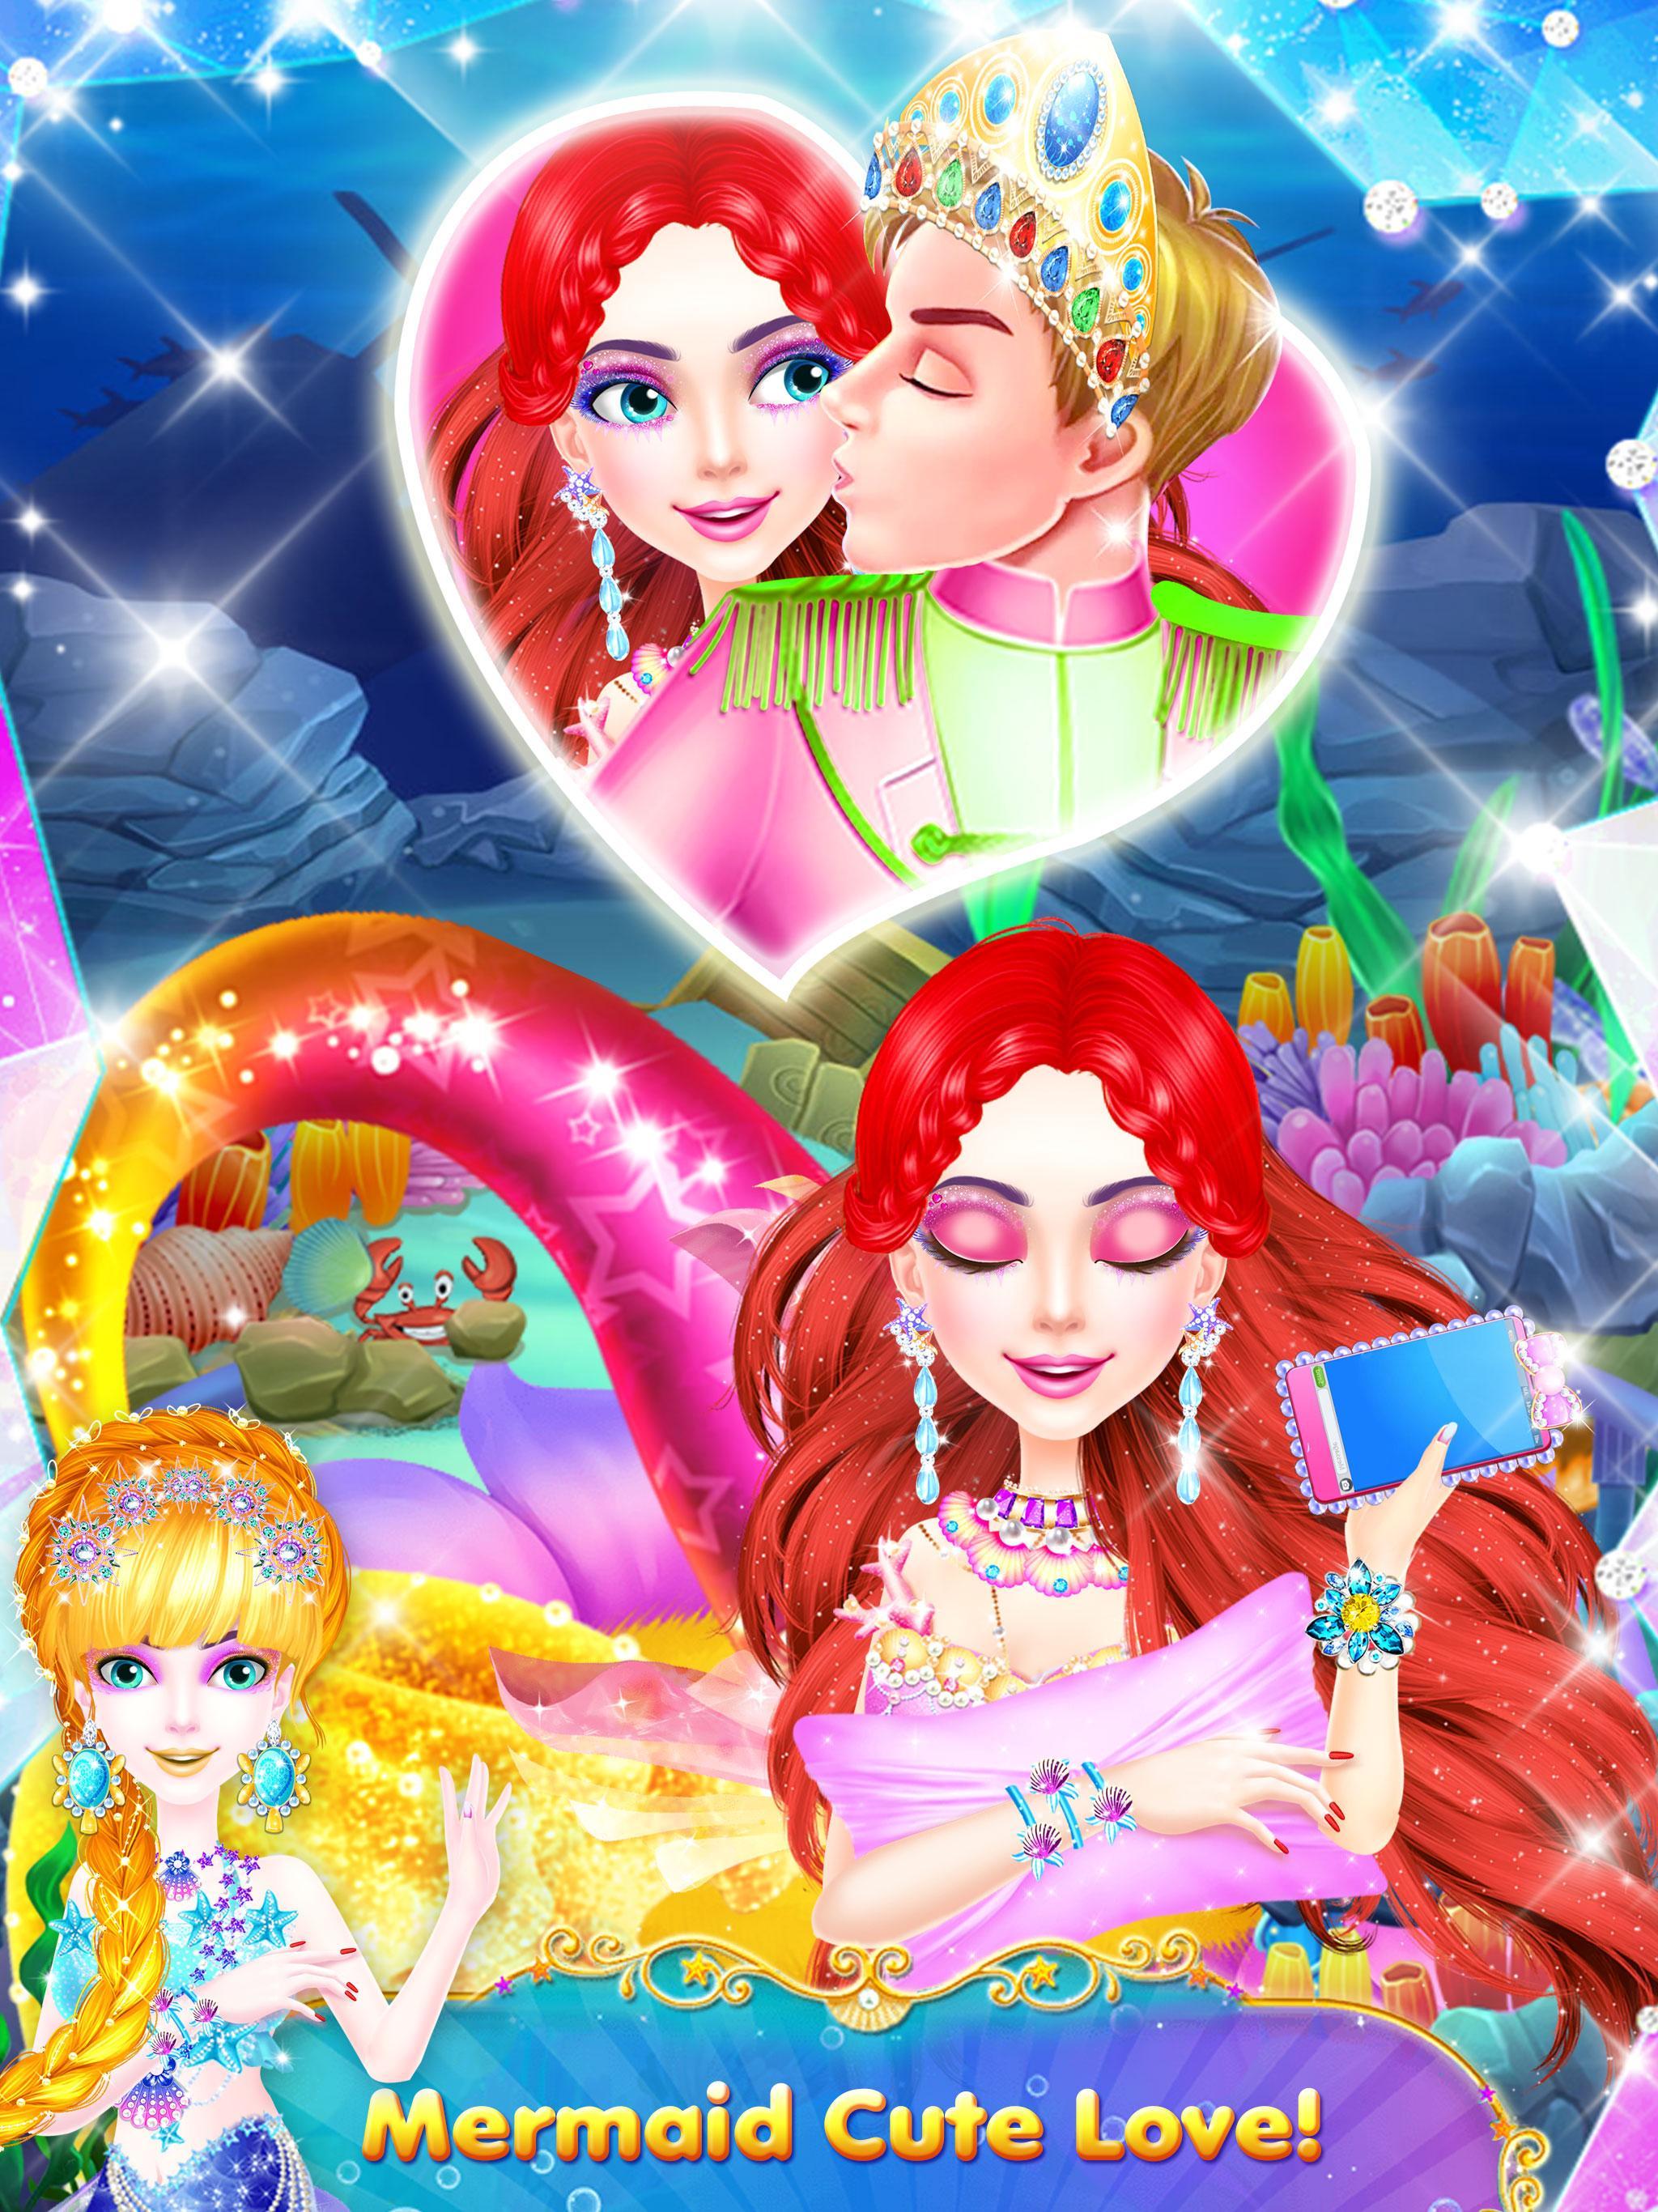 Little Mermaid Games - Secrets Dress up for Girls for Android - APK ...